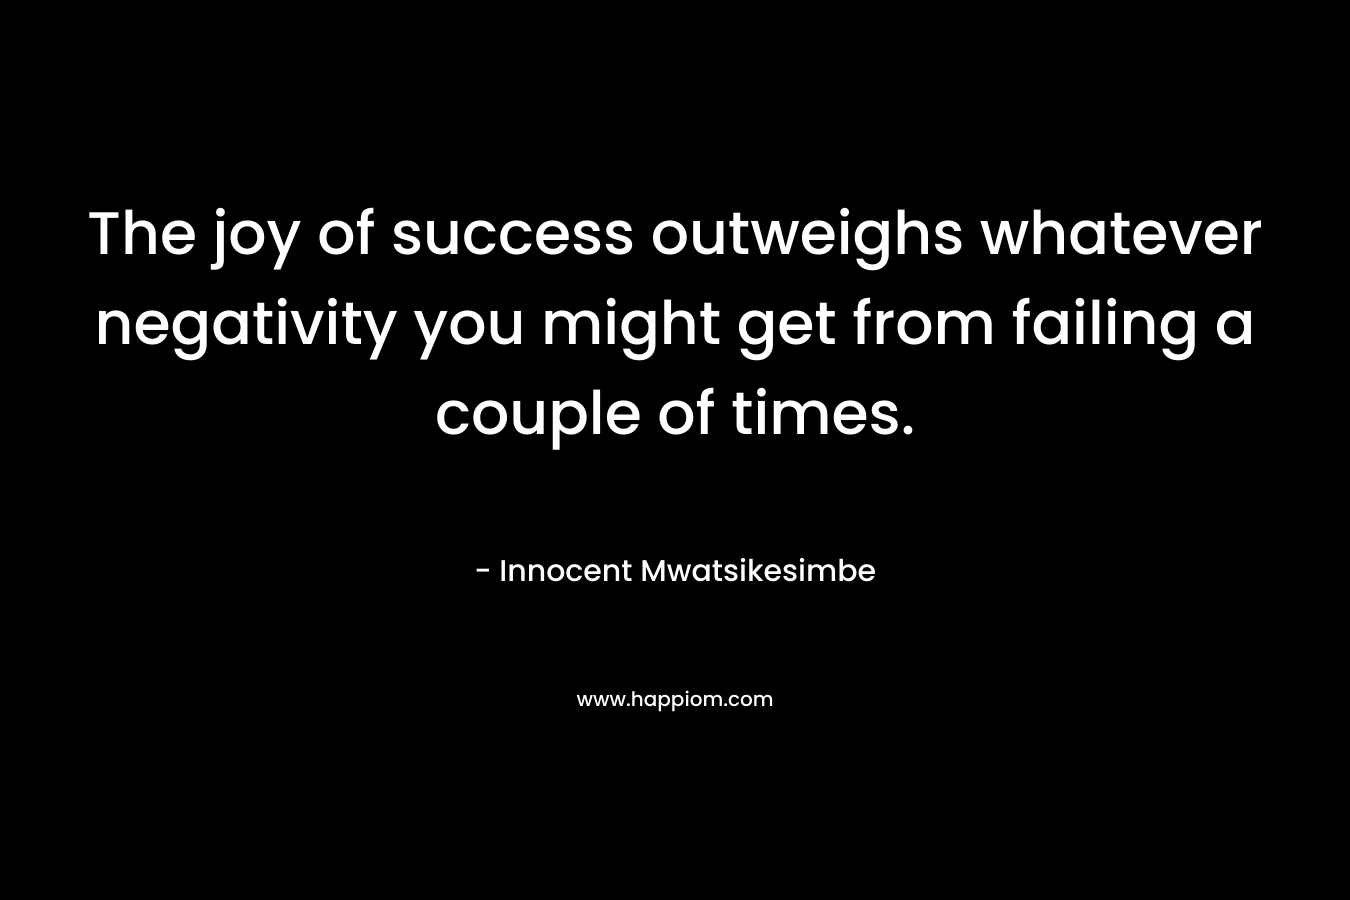 The joy of success outweighs whatever negativity you might get from failing a couple of times.